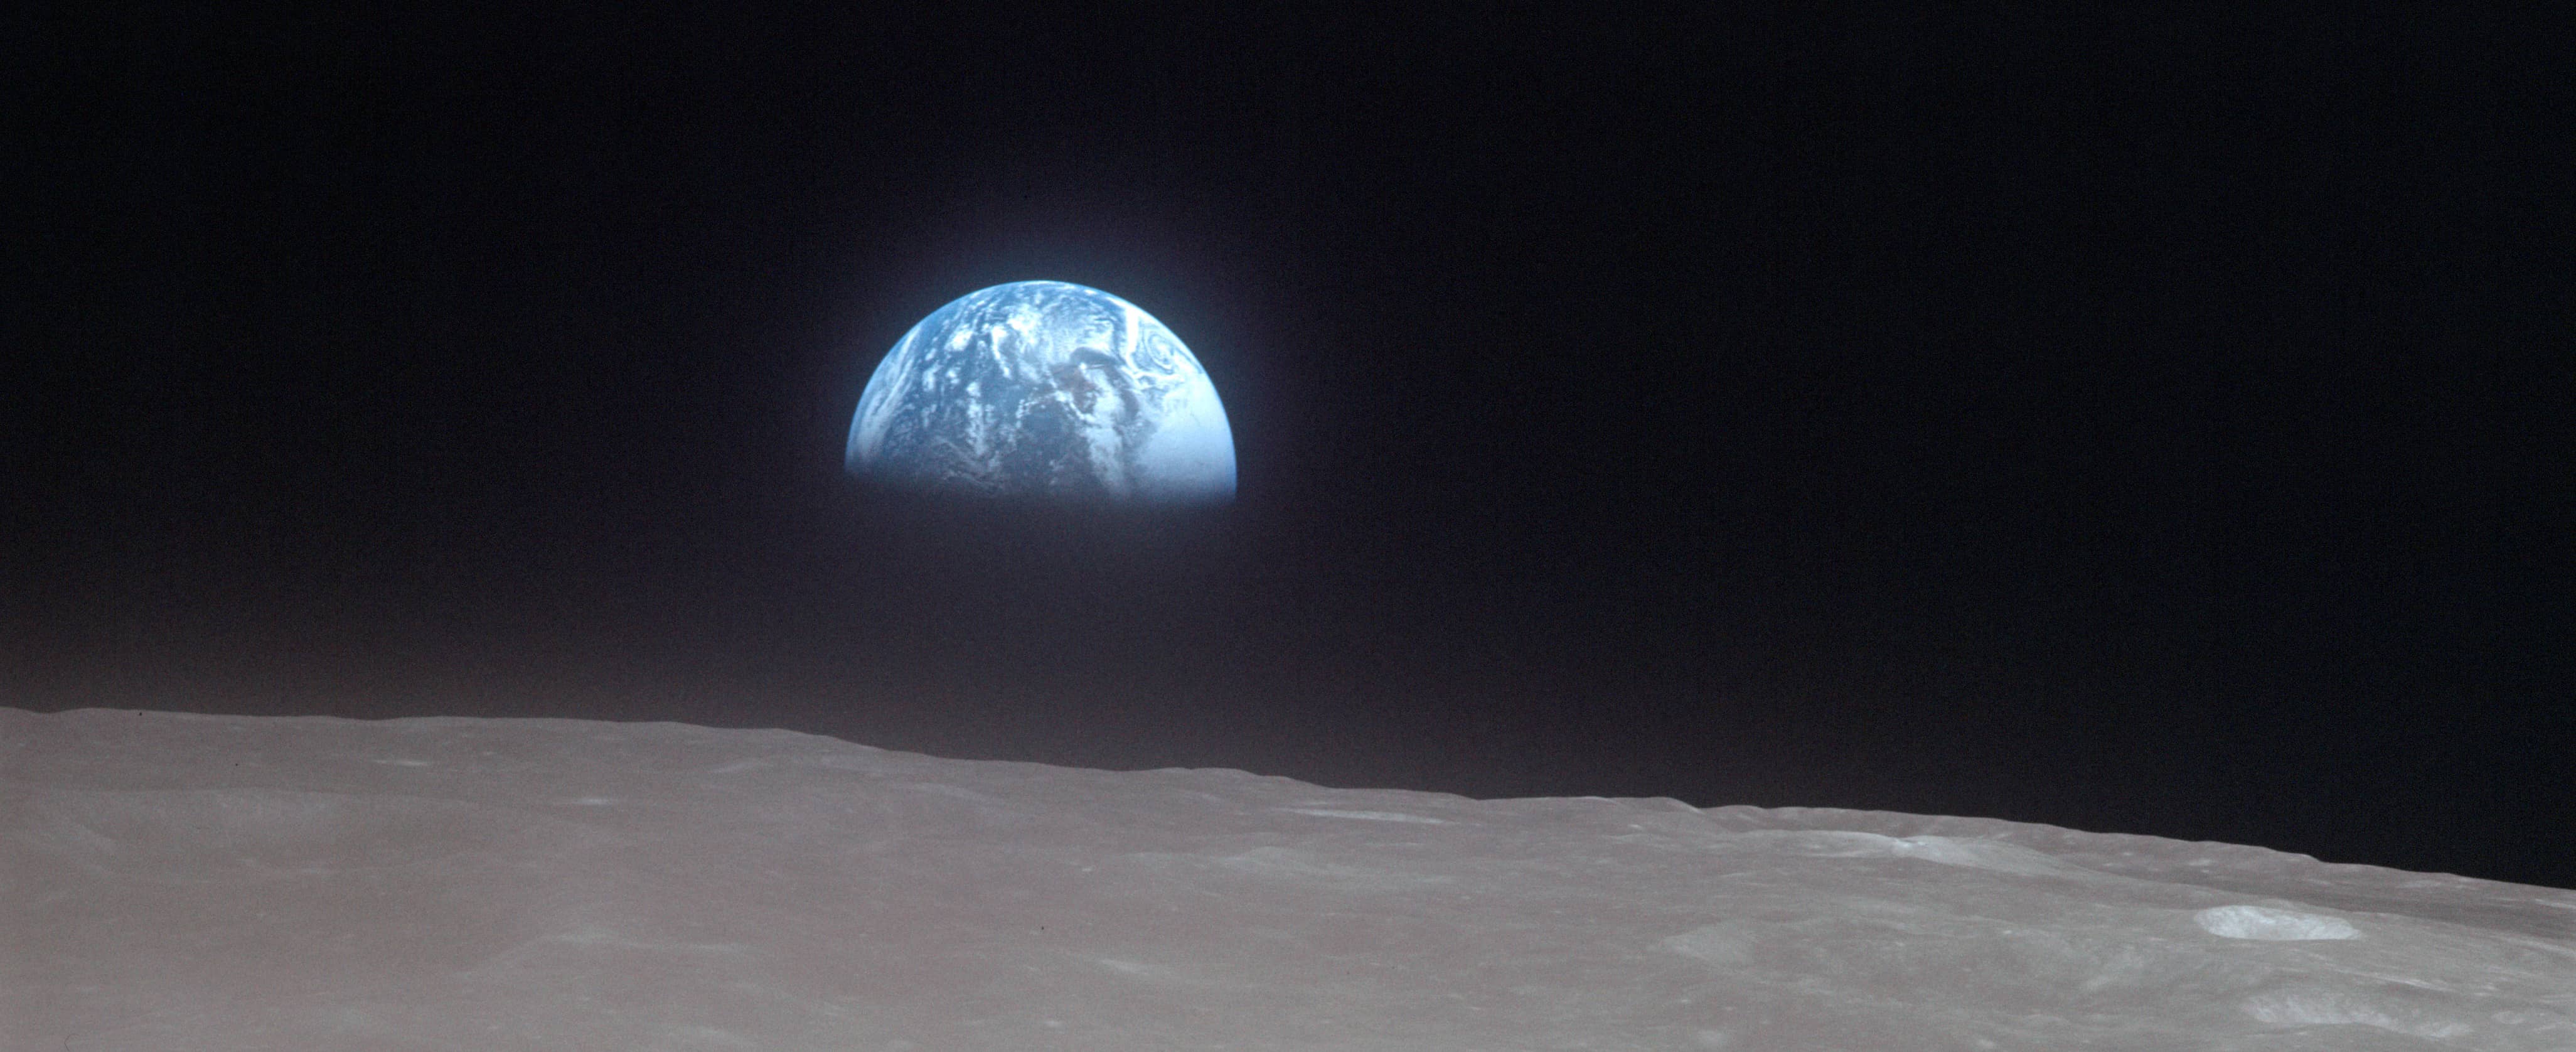 Earthrise as seen from the moon.